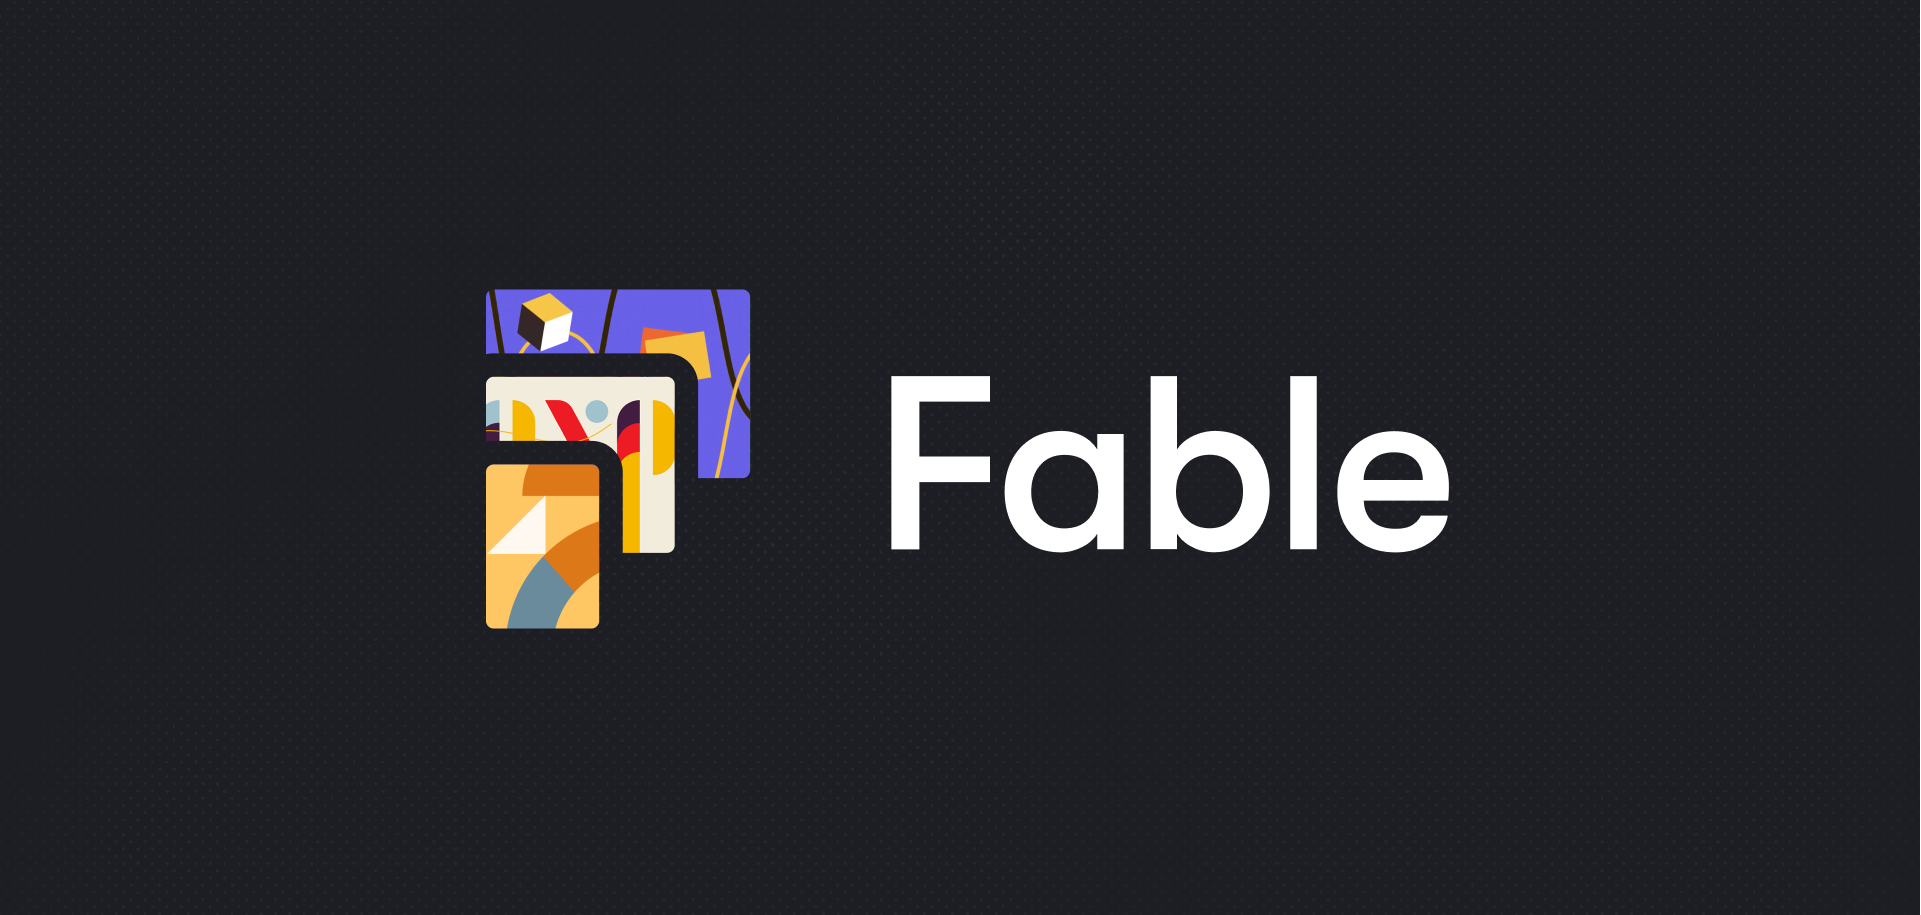 Image of Fable's new brand